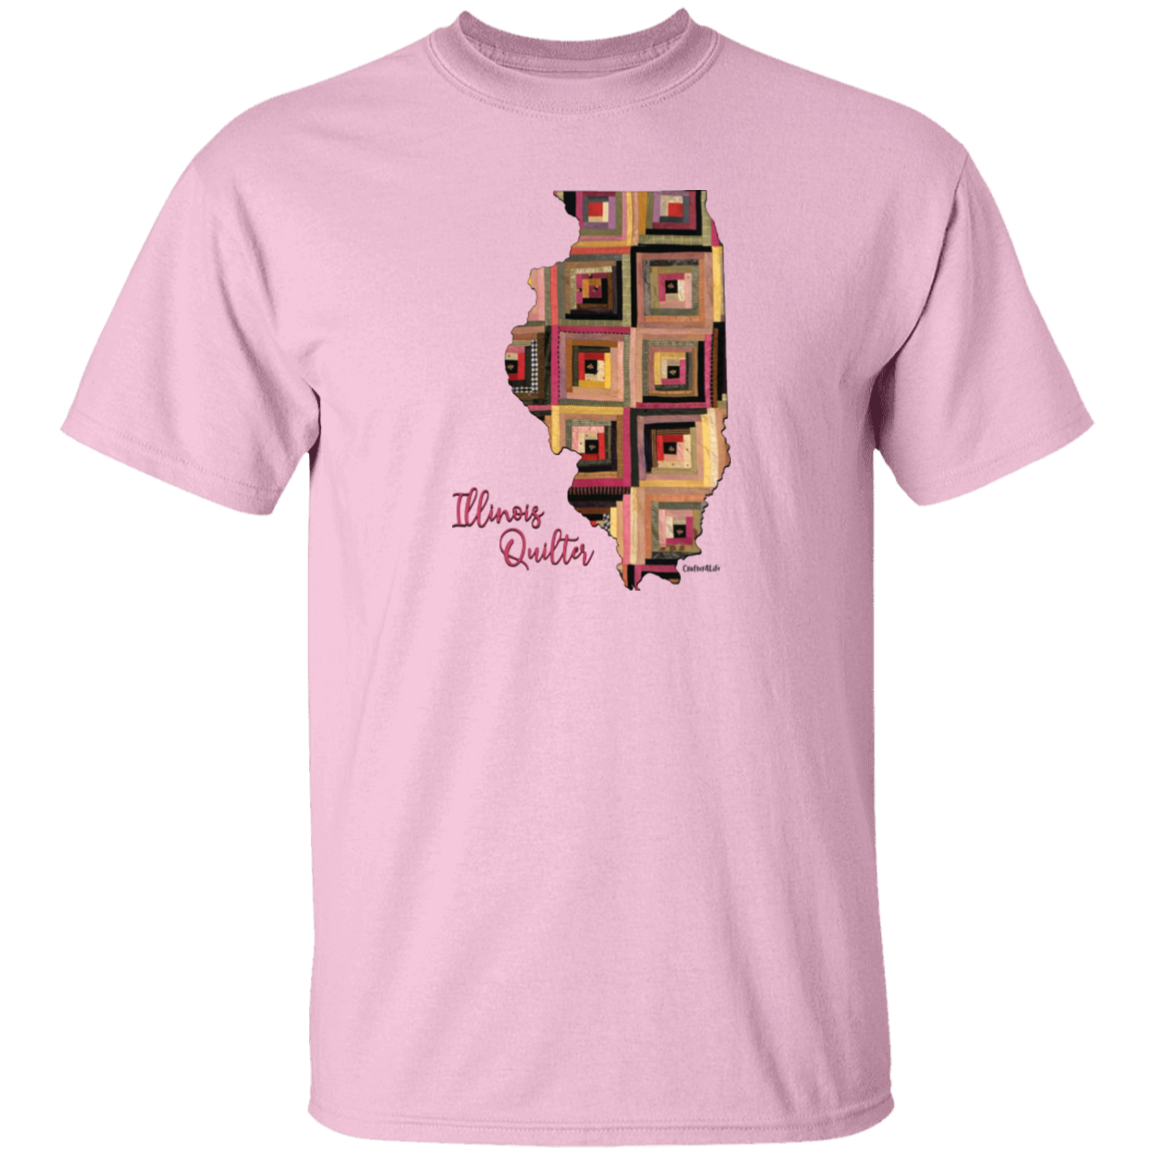 Illinois Quilter T-Shirt, Gift for Quilting Friends and Family